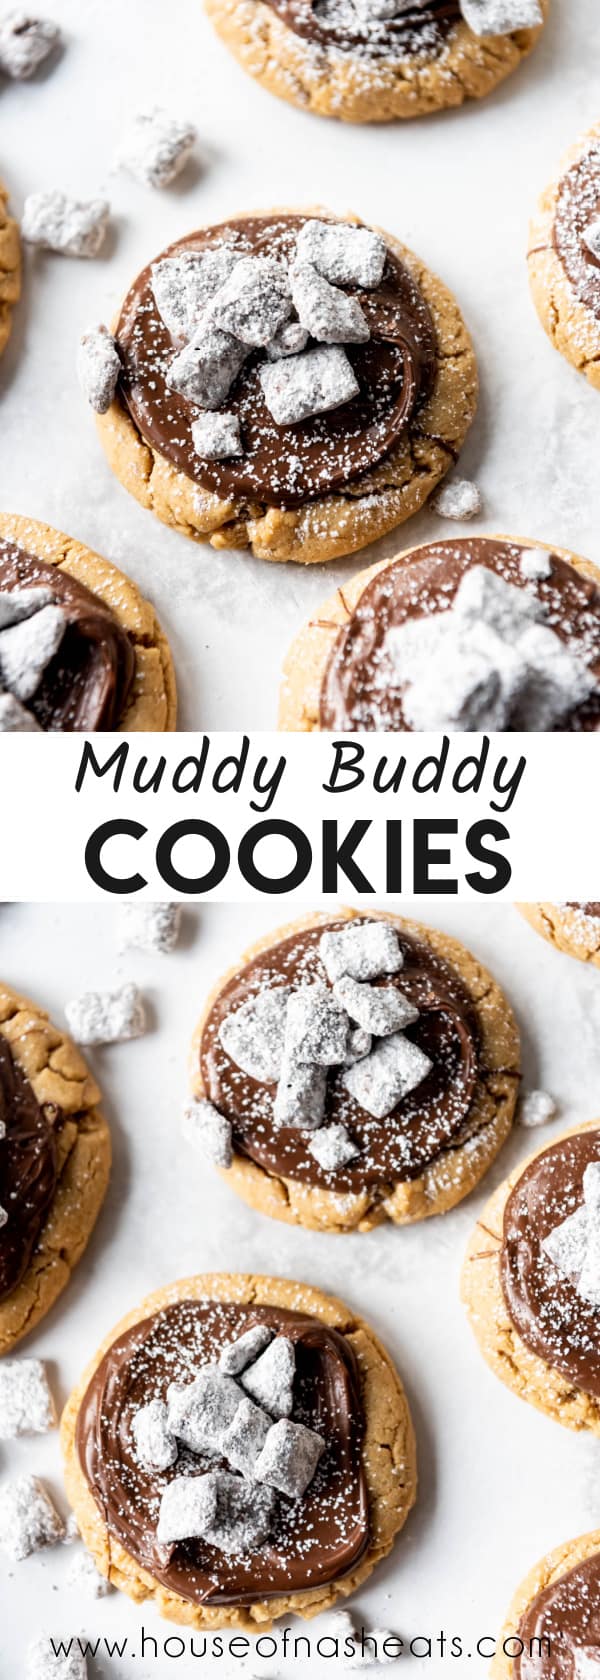 A collage of images of muddy buddy cookies with text overlay.